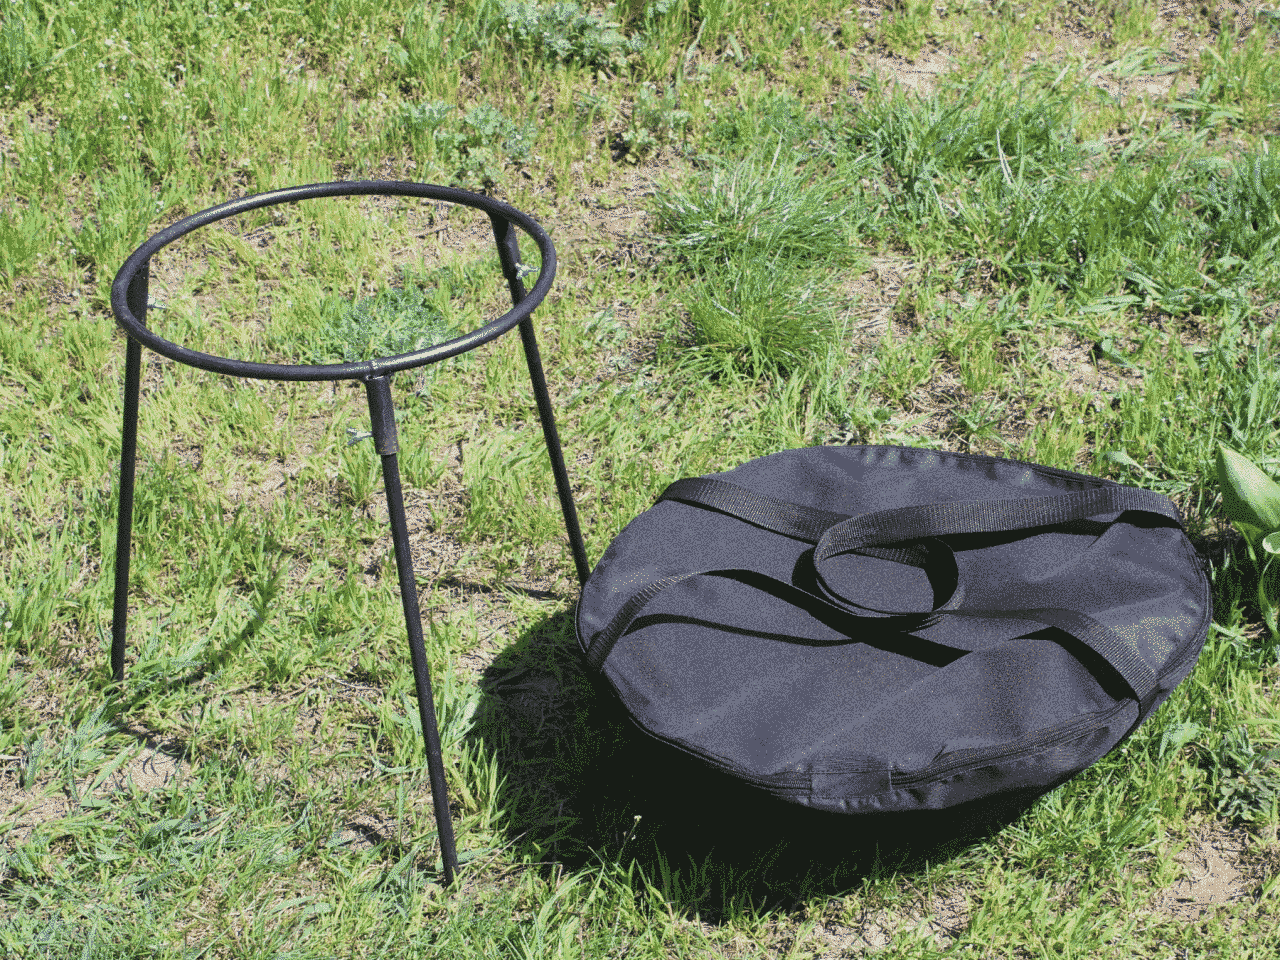 Cast iron asian cauldron 15 L WITH A GRILL LID-FRYING PAN, a bag and a stand